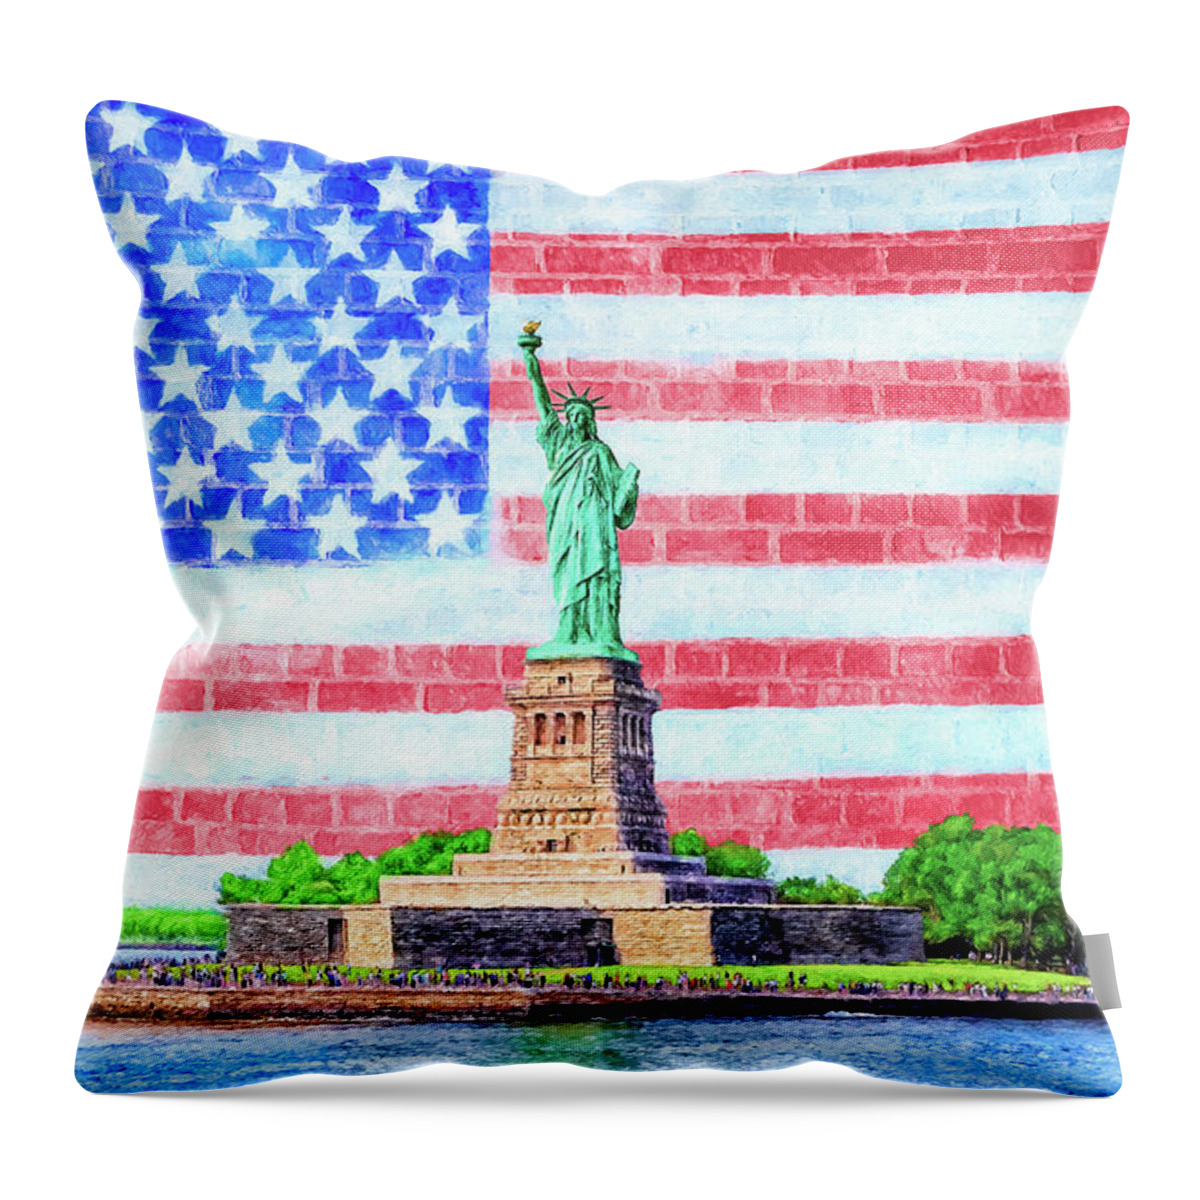 Statue Throw Pillow featuring the mixed media Statue Of Liberty - Mural Style by Mark Tisdale